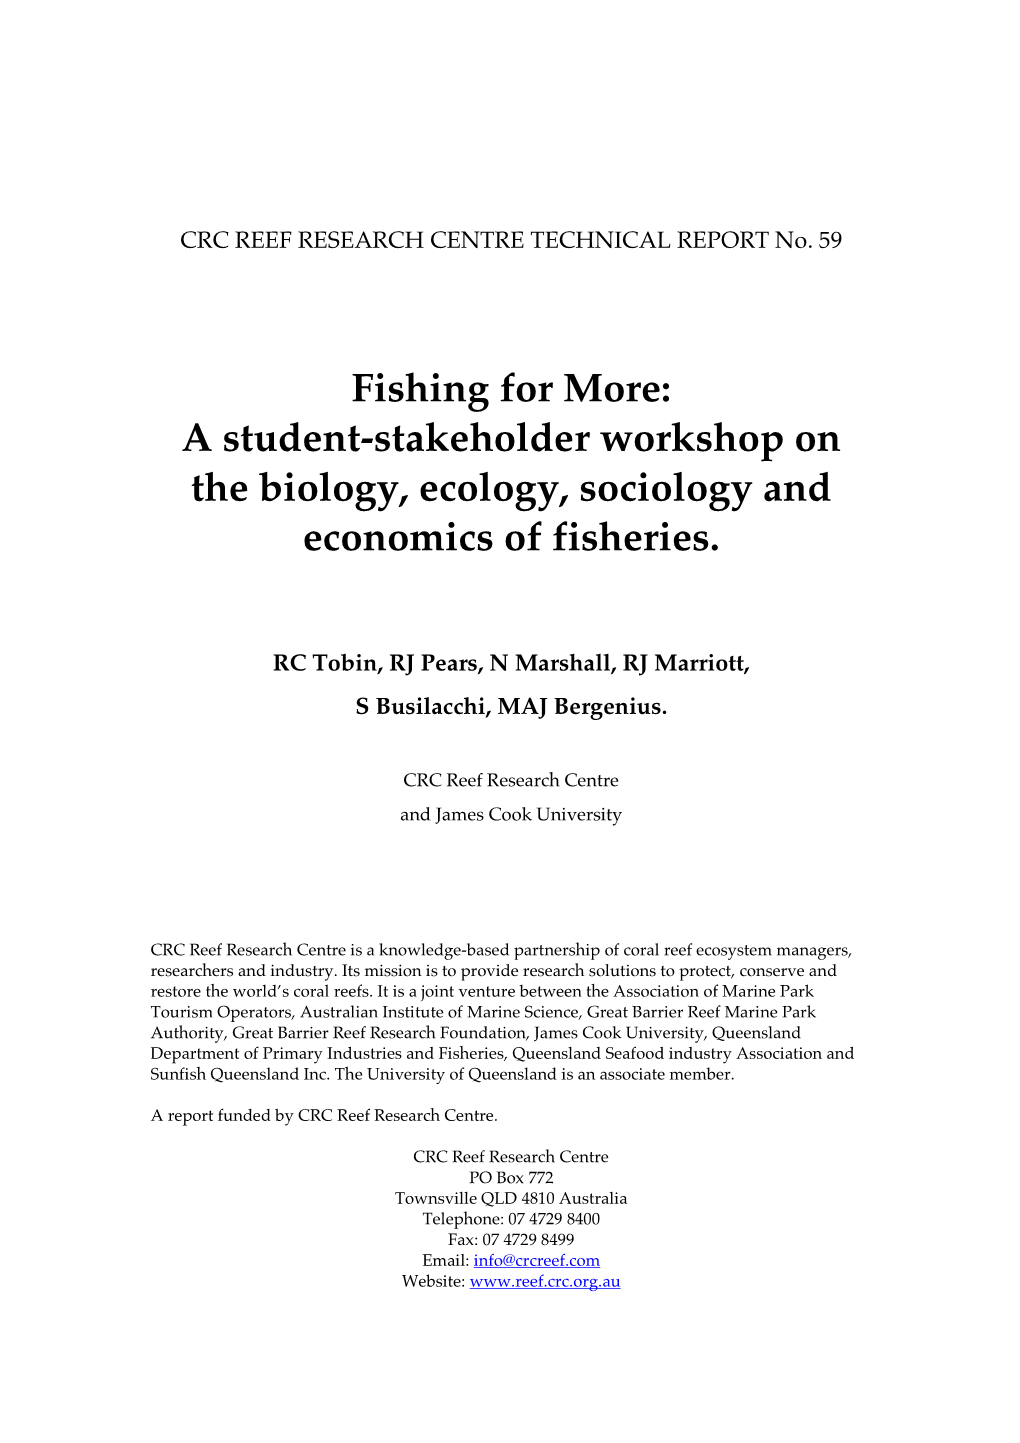 Fishing for More: a Student-Stakeholder Workshop on the Biology, Ecology, Sociology and Economics of Fisheries